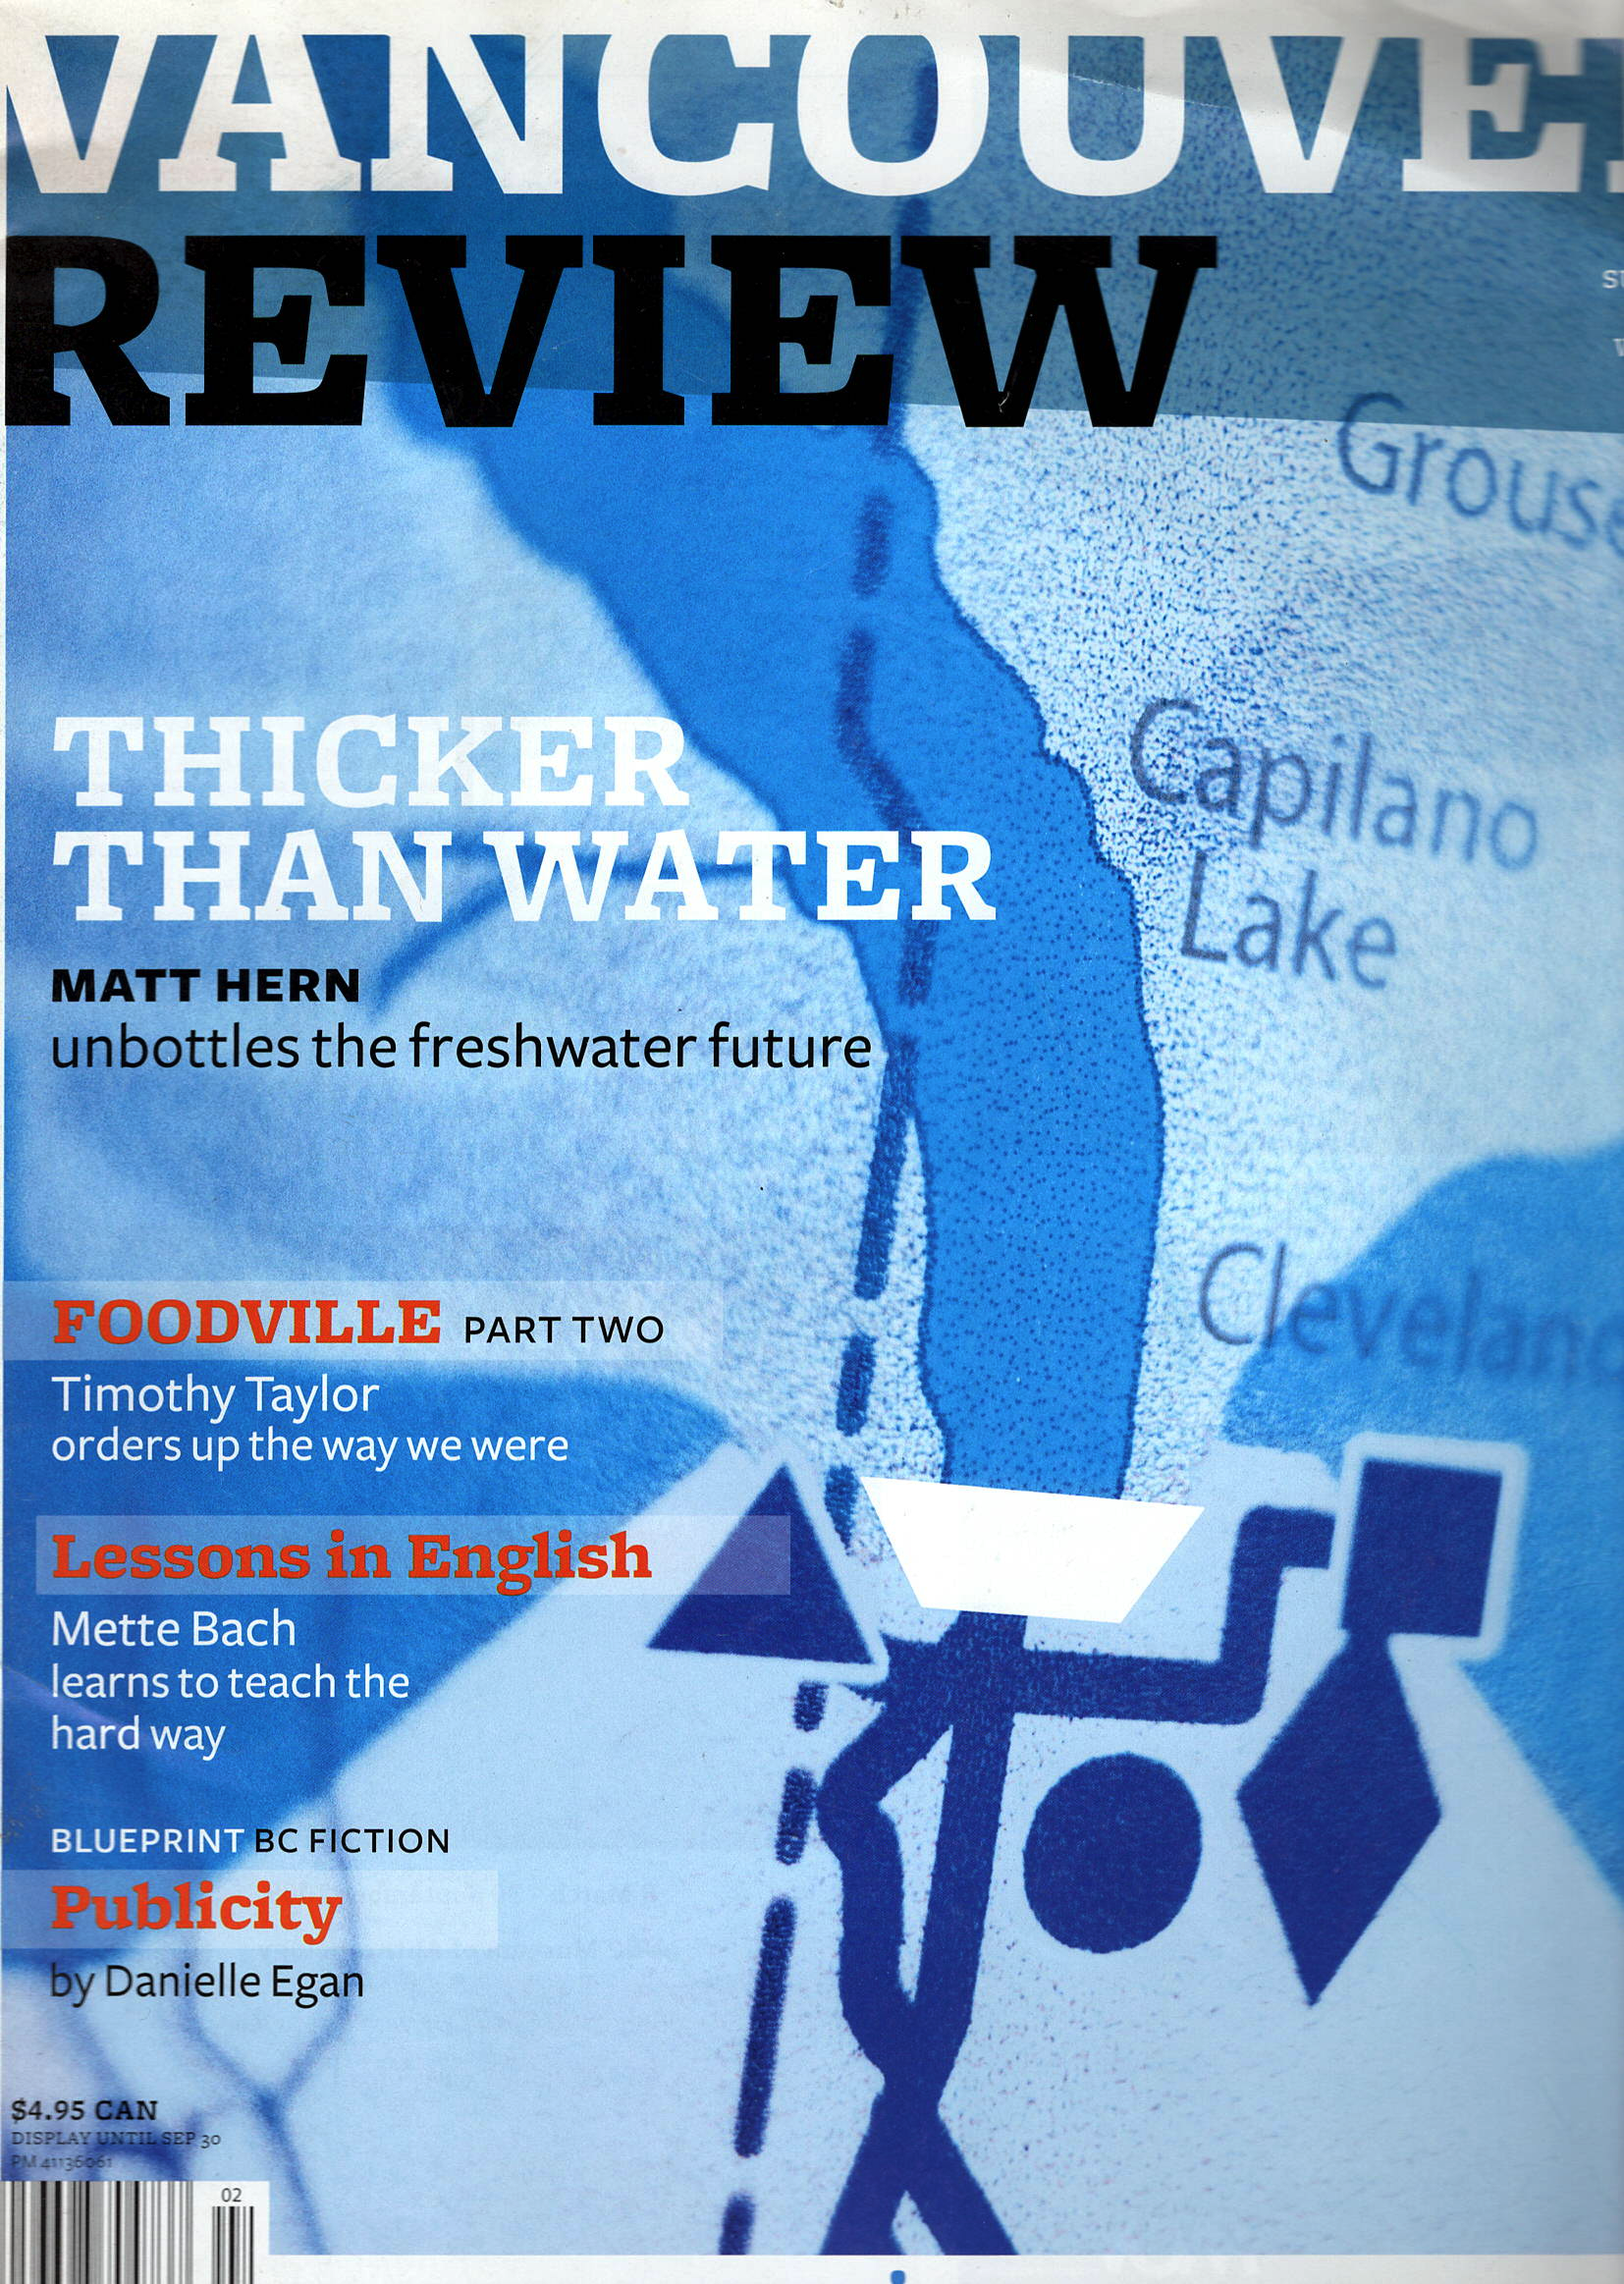 Vancouver Review.png